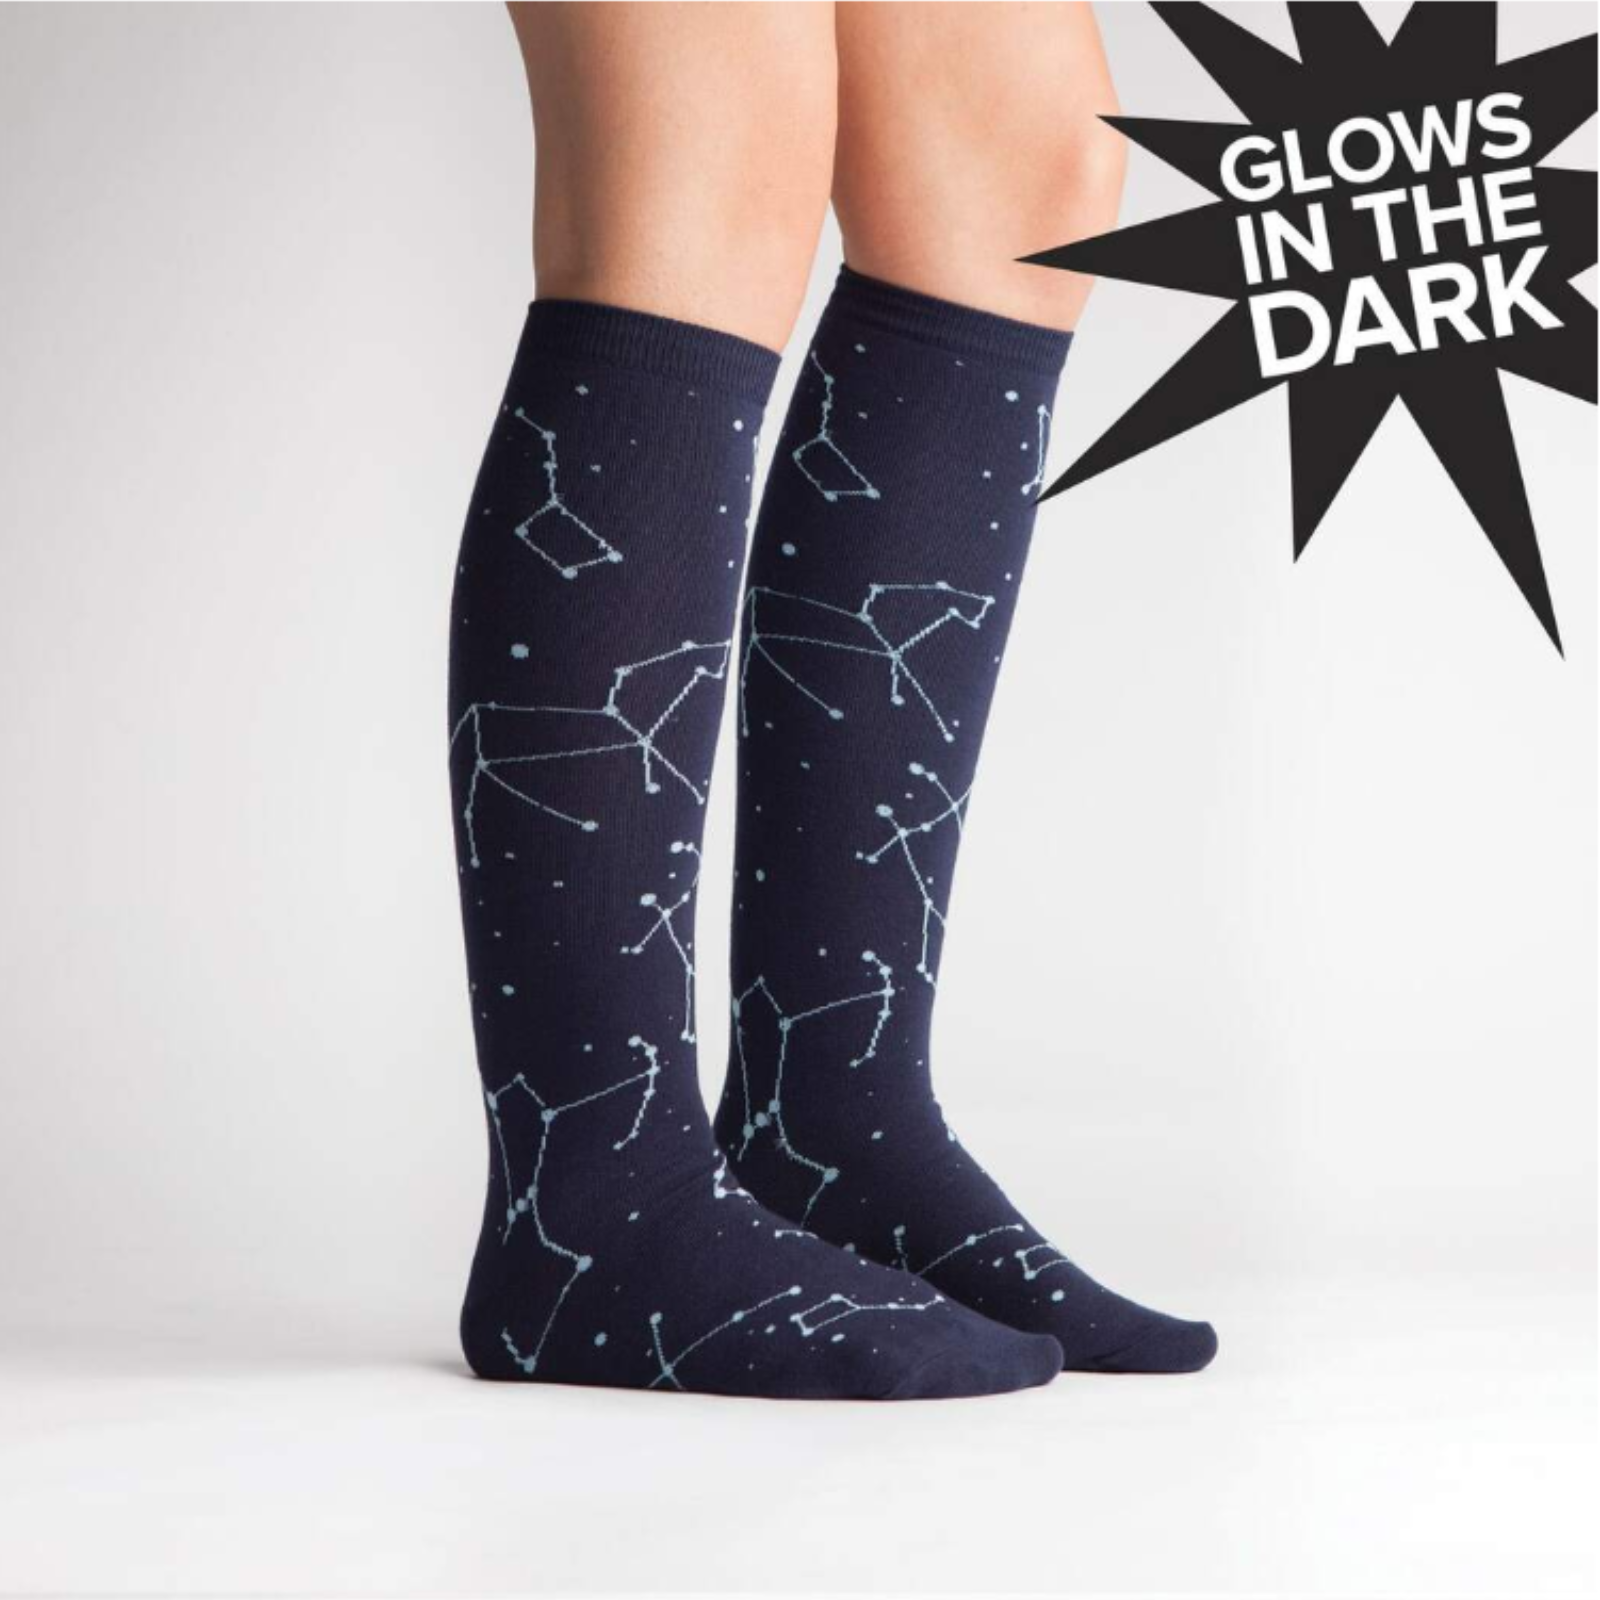 Sock It To Me Constellation (GLOWS IN THE DARK!) women's knee high sock. Featuring navy blue sock with constellations all over. Socks worn by model. 